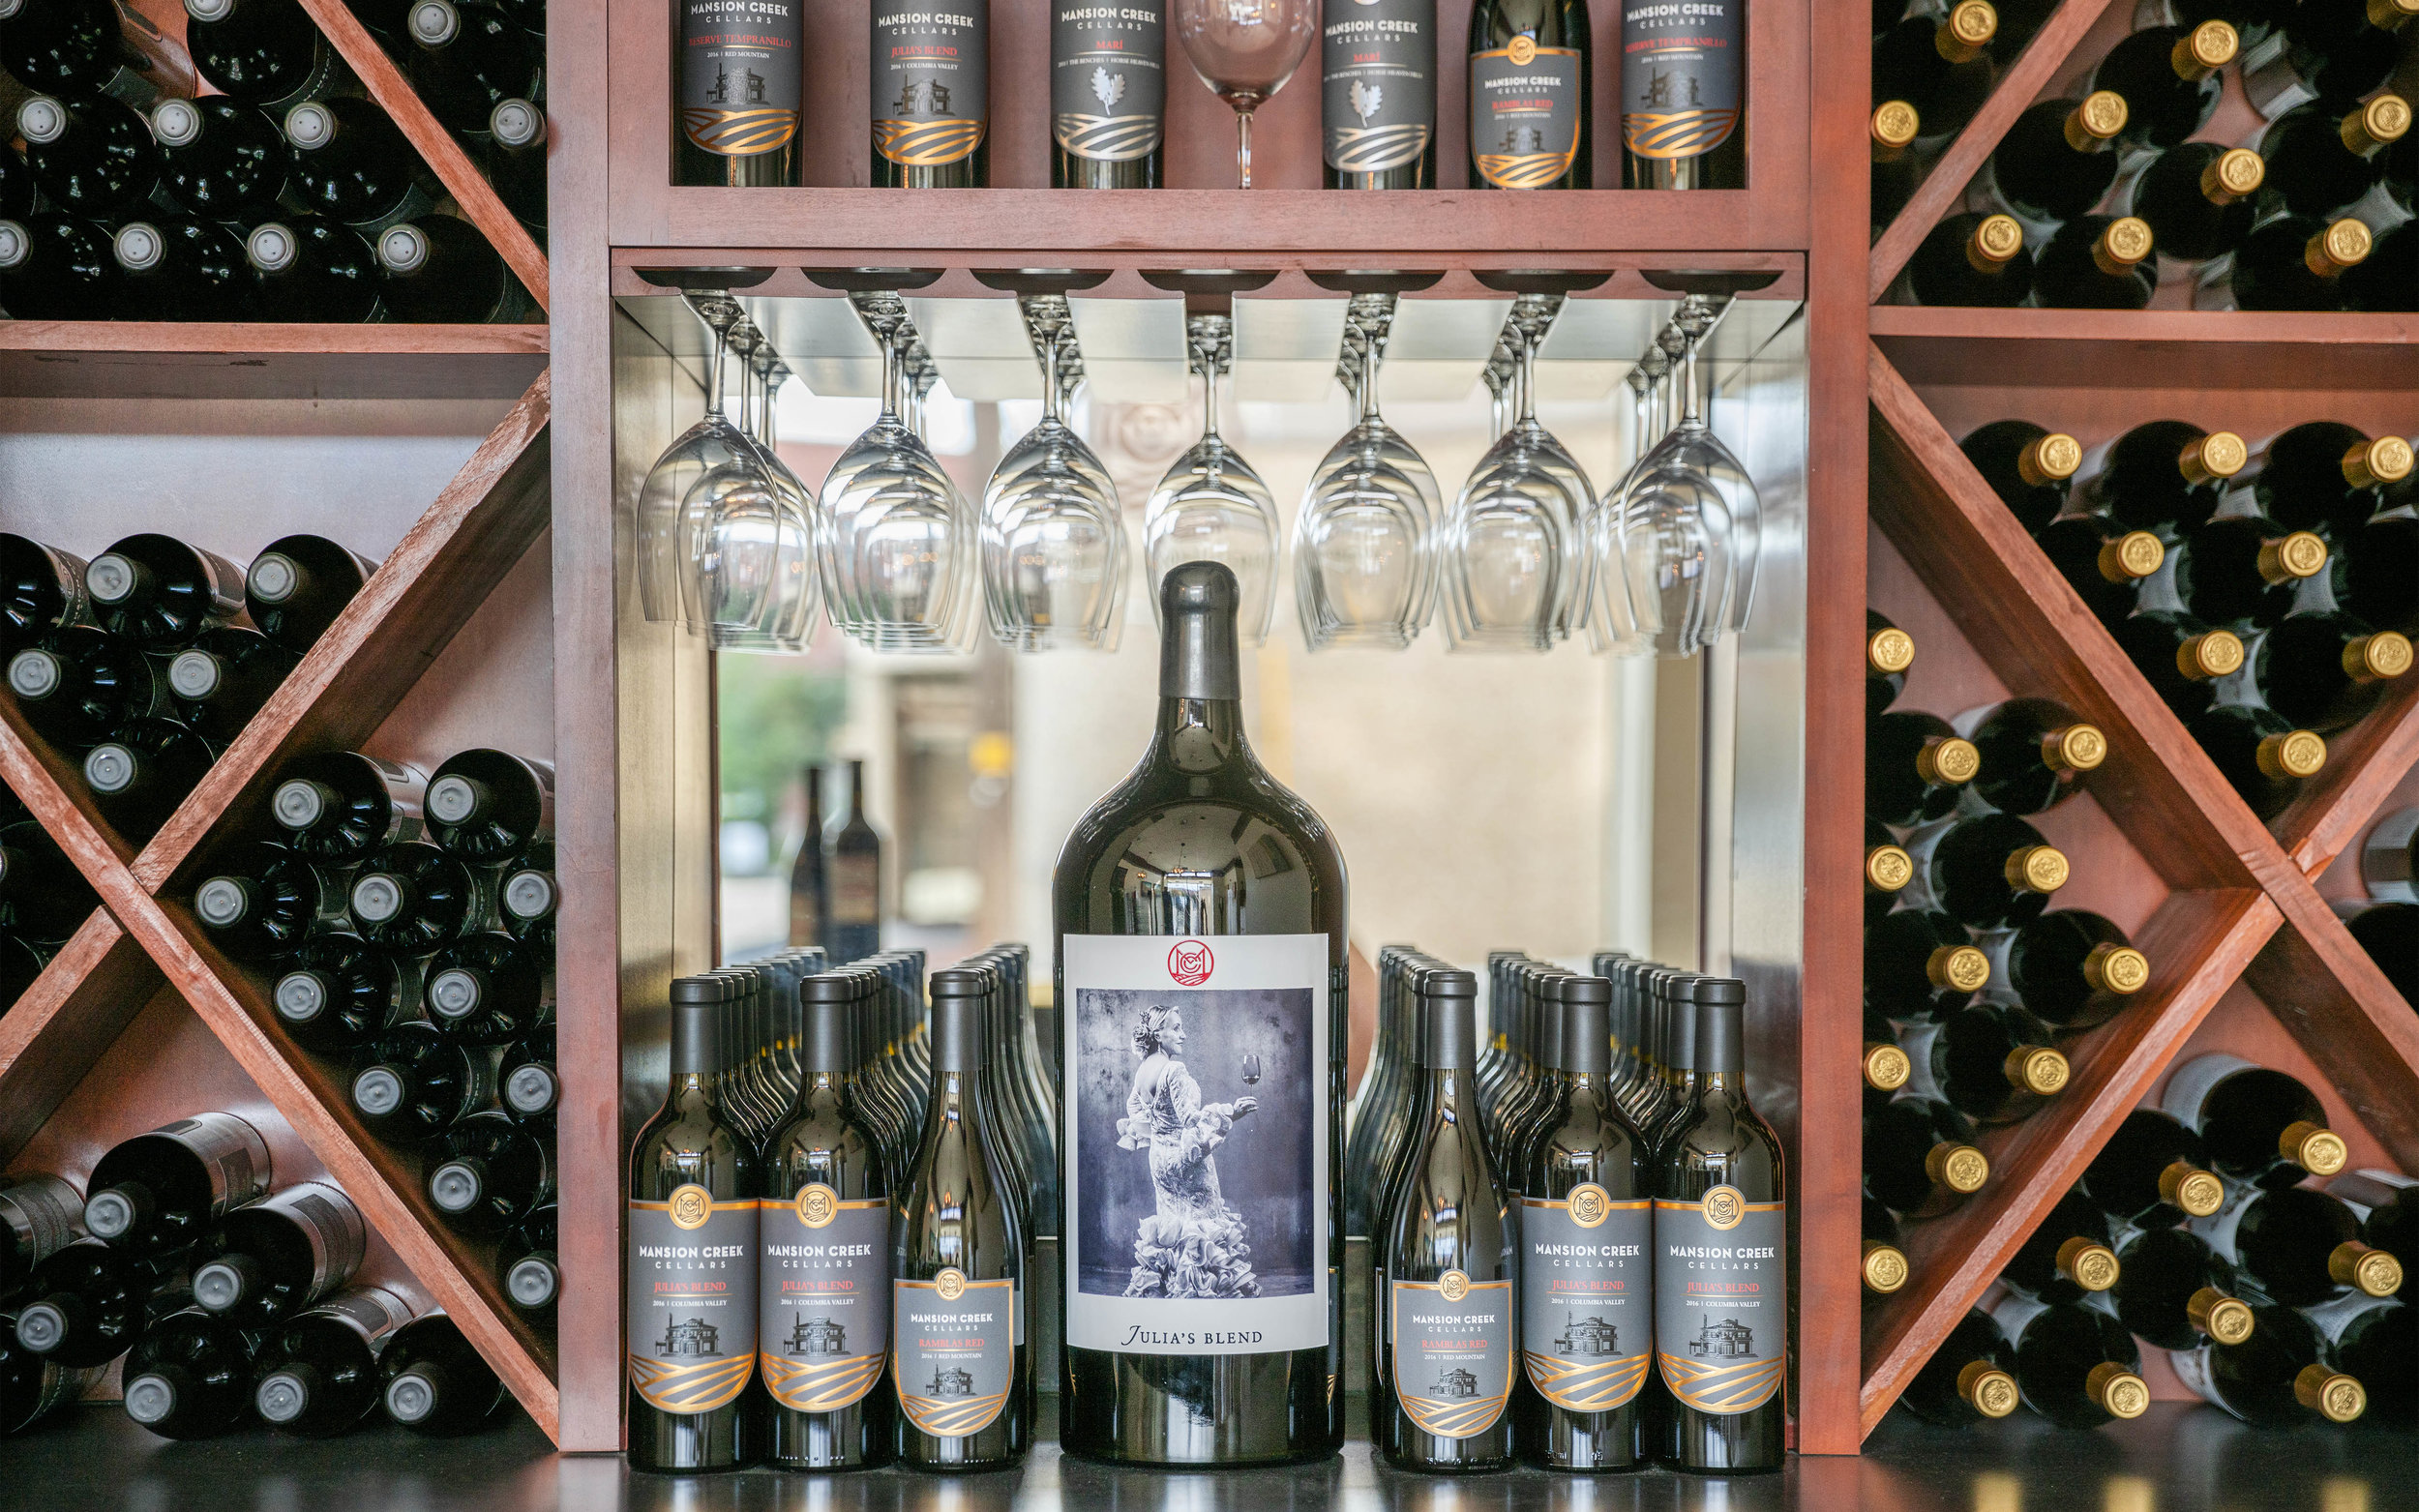 A magnum sized bottle of Mansion Creek Cellars wine, surrounded by bottles and glassware on a shelf in the Walla Walla tasting room.